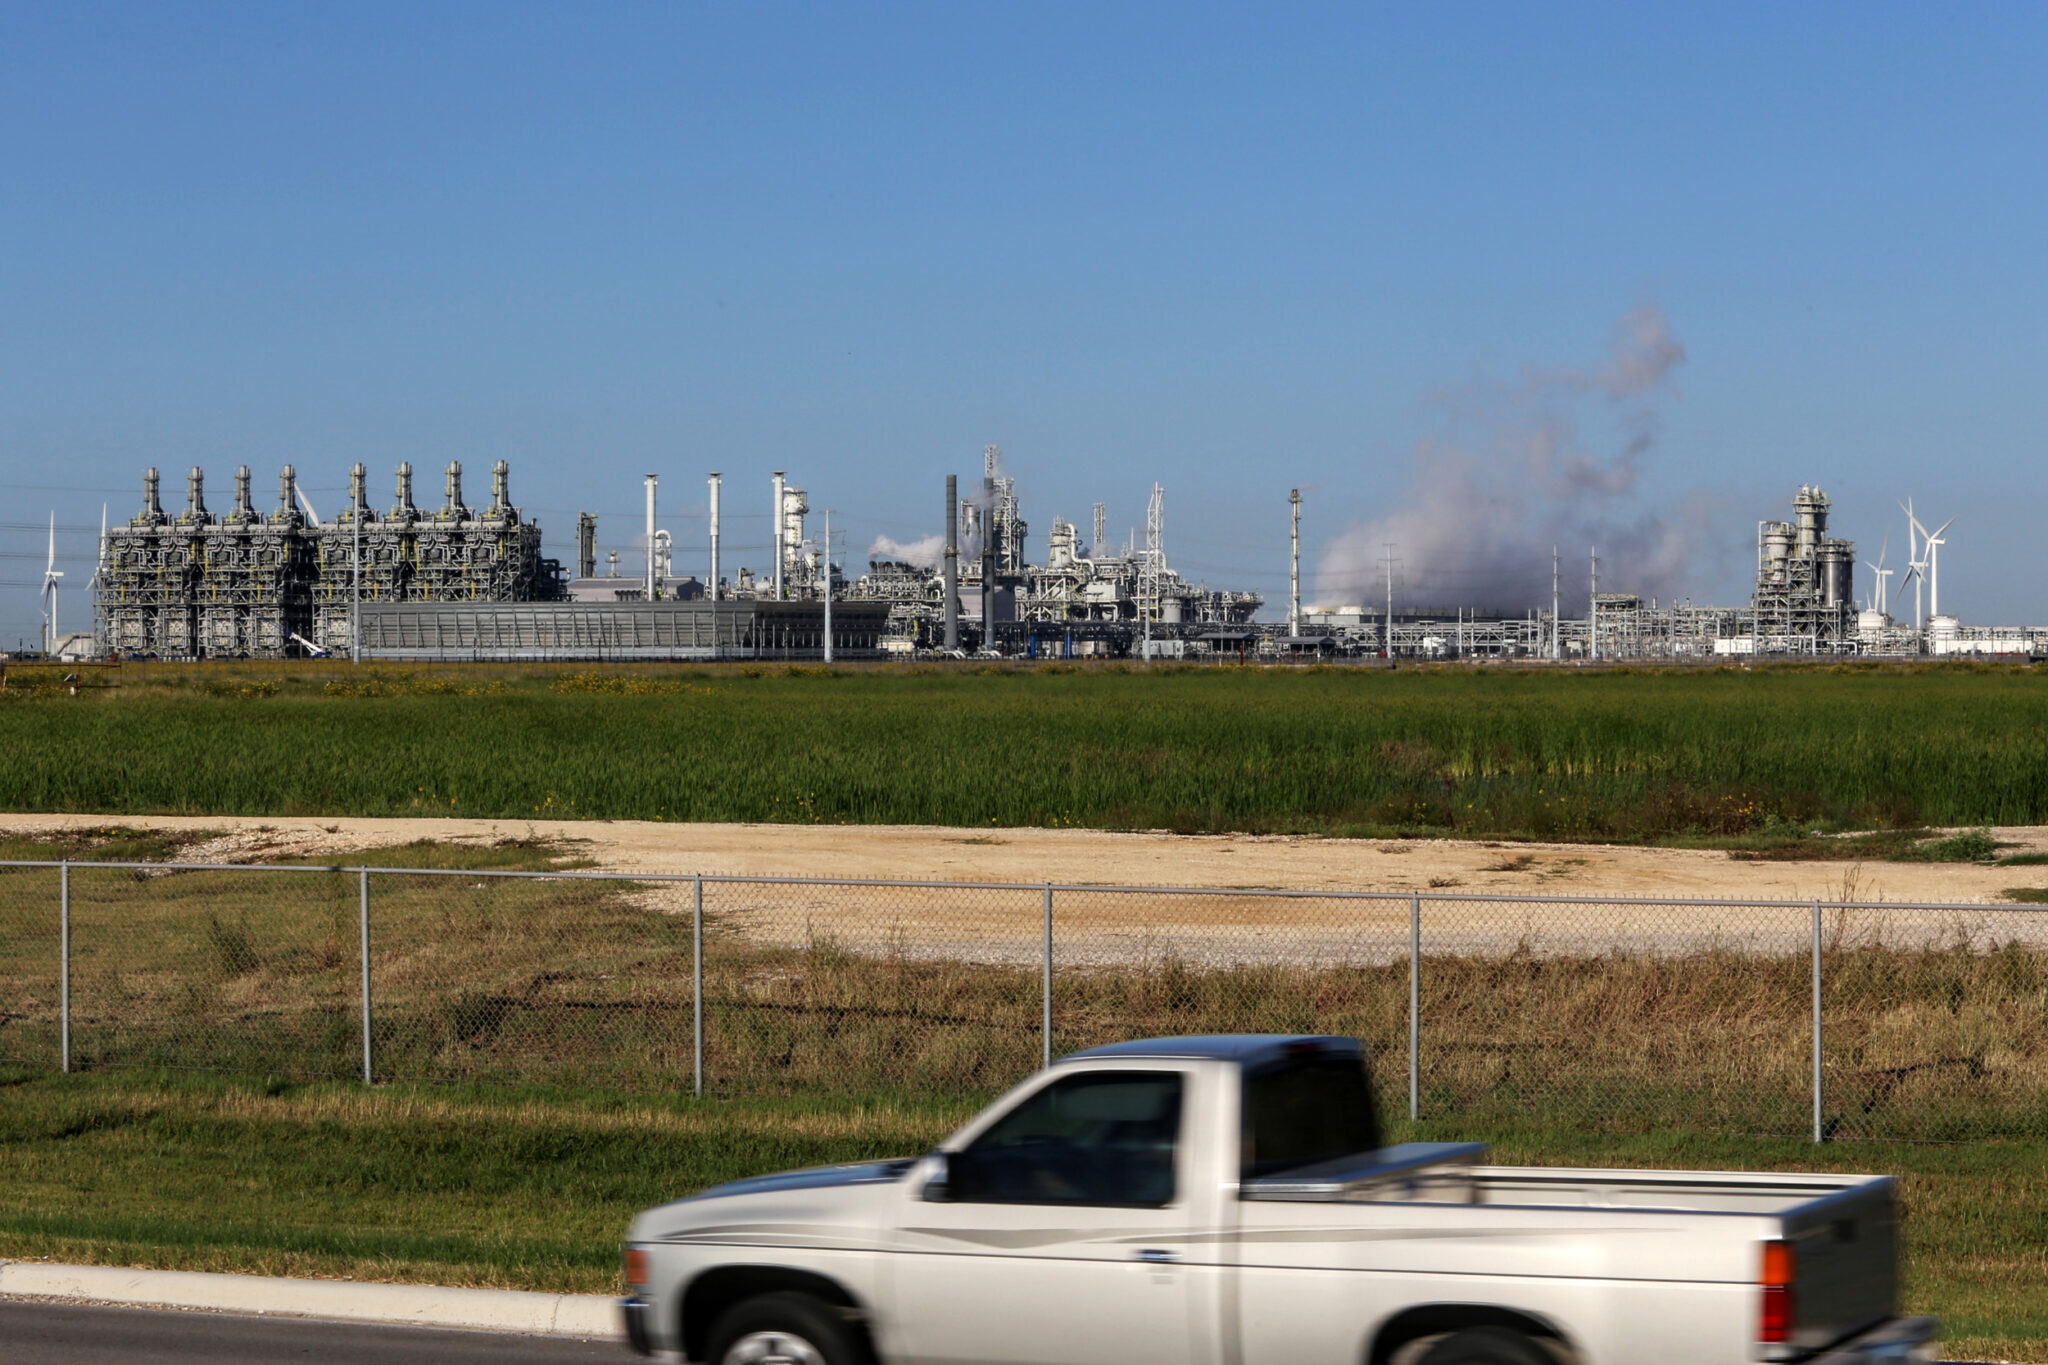 Gulf Coast Growth Ventures, a $10 billion plastics plant built by ExxonMobil and SABIC, started operations this year on 1,300 acres of previously undeveloped land in San Patricio County, across the bay from Corpus Christi, Texas.